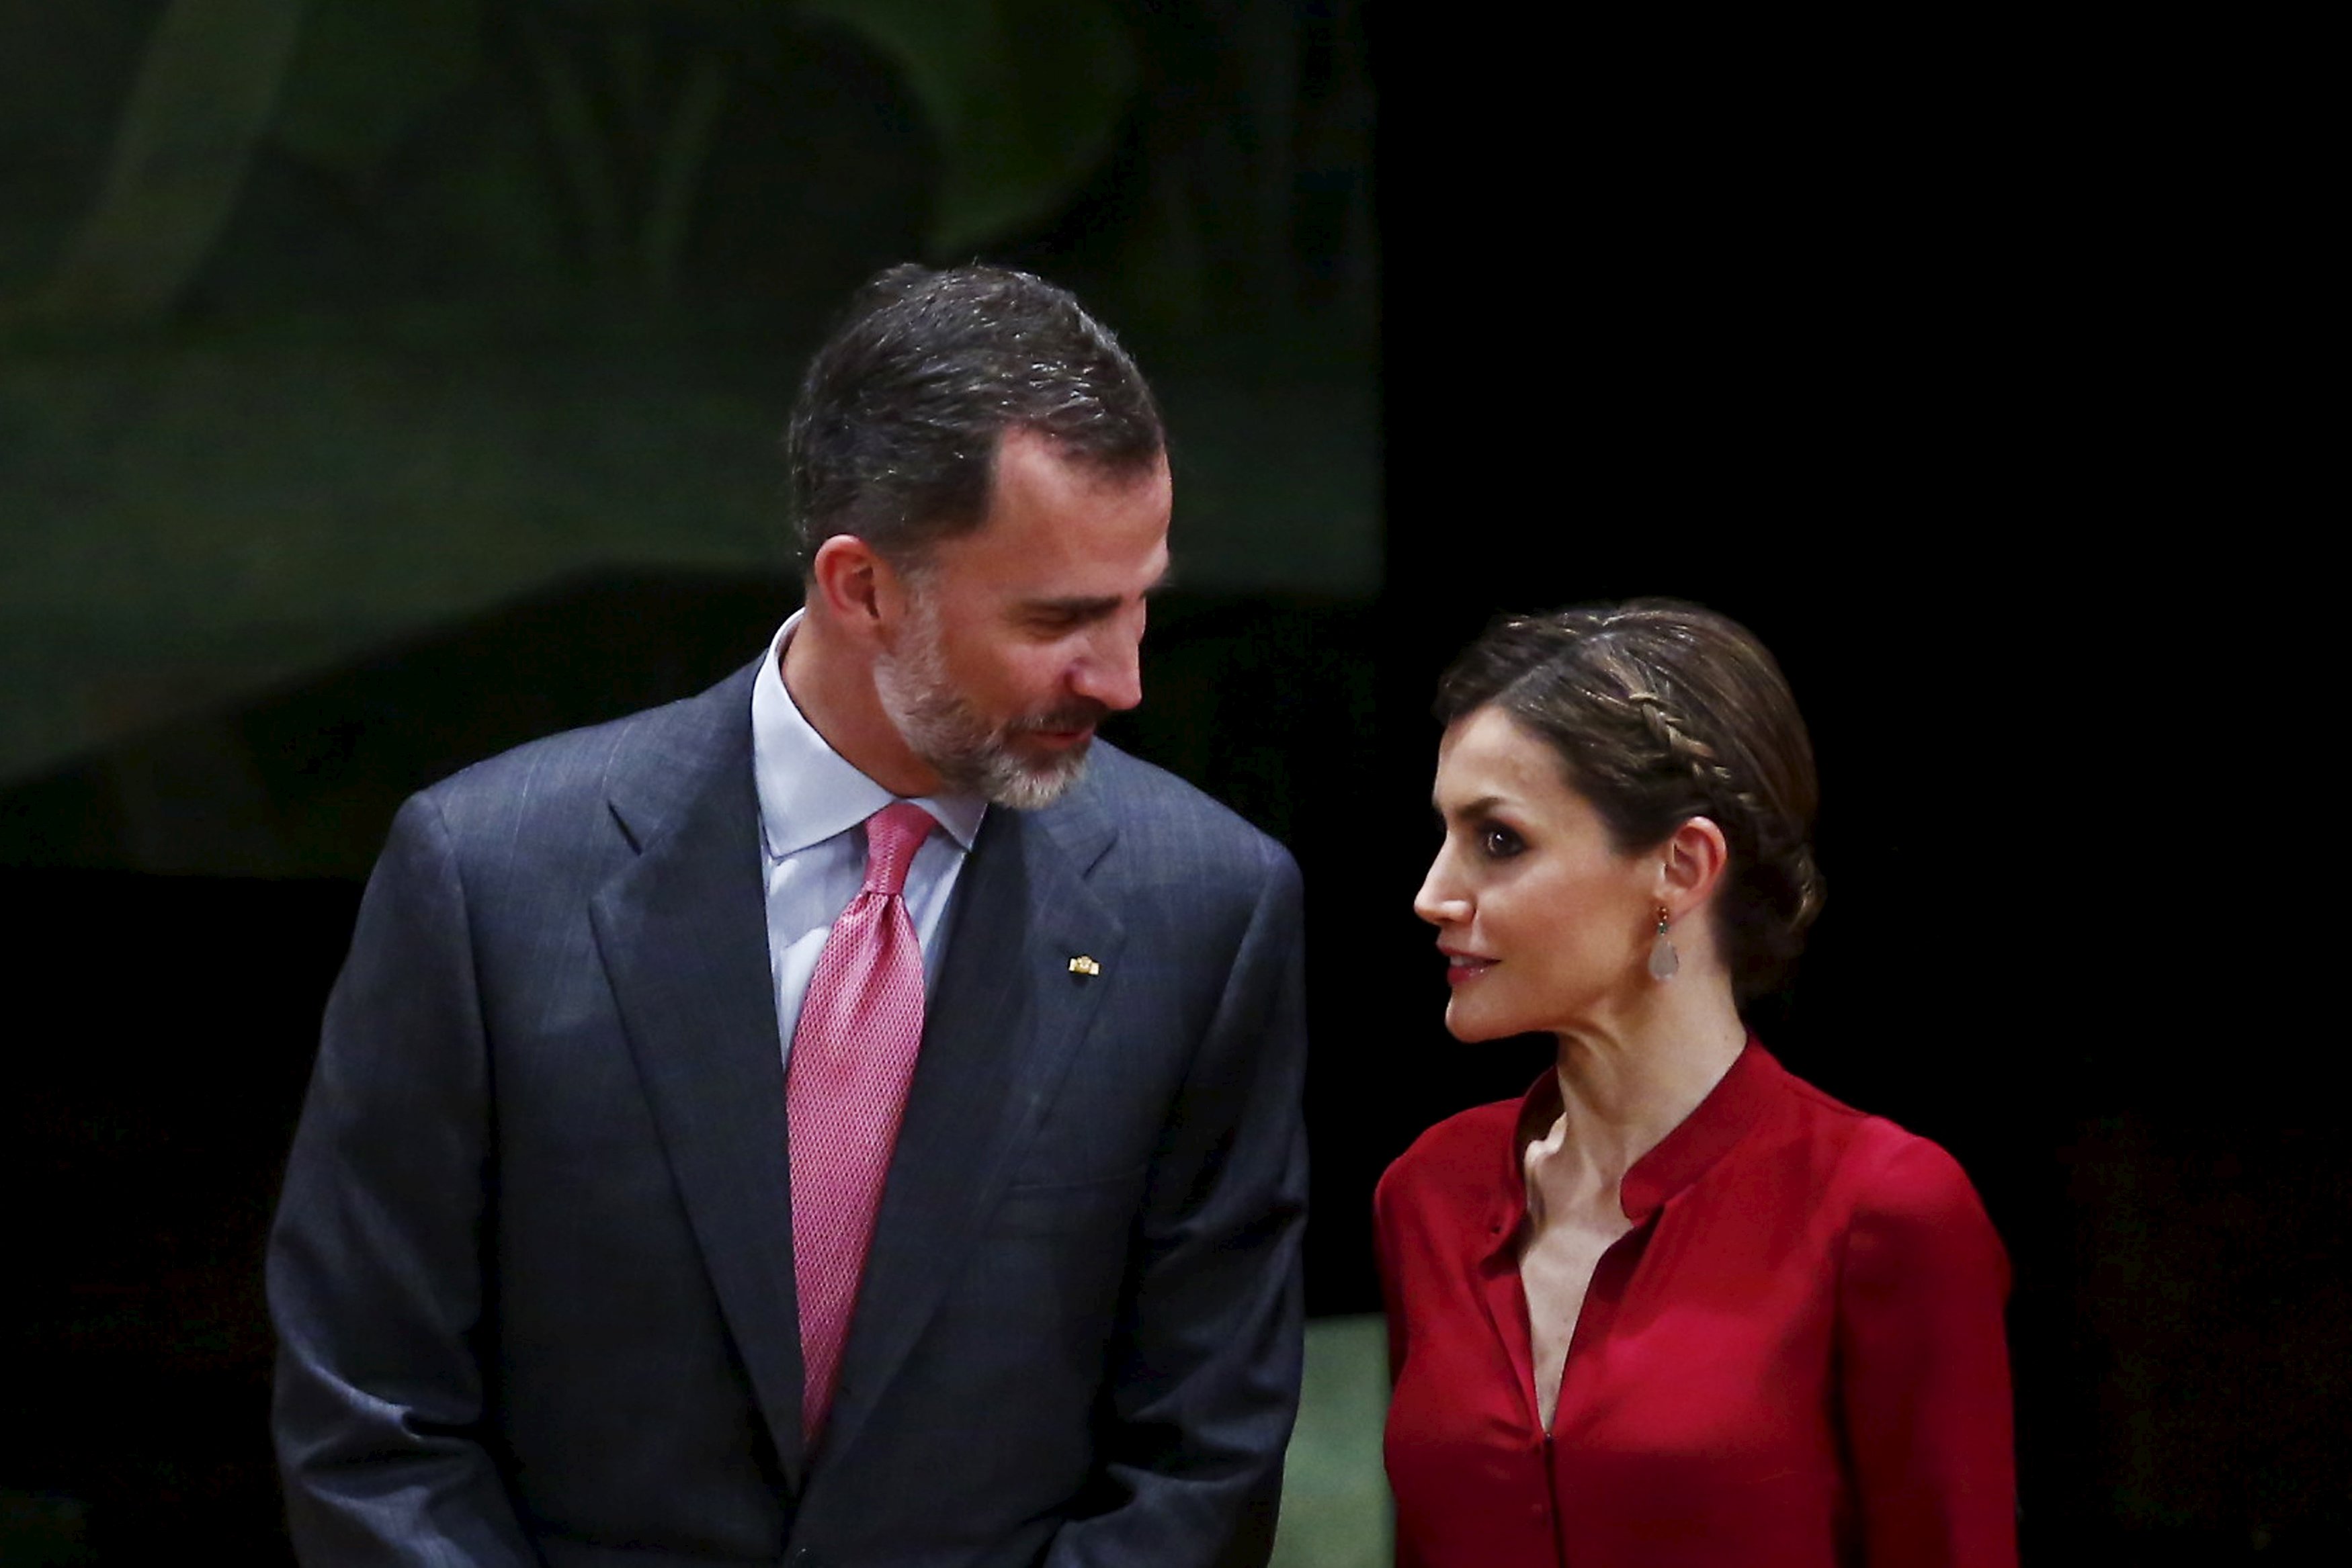 Spain's King Felipe and Queen Letizia speak during the signing of a cooperation agreement between National Autonomous University of Mexico (UNAM), Cervantes Institute and University of Salamanca in Mexico City, June 30, 2015. REUTERS/Edgard Garrido